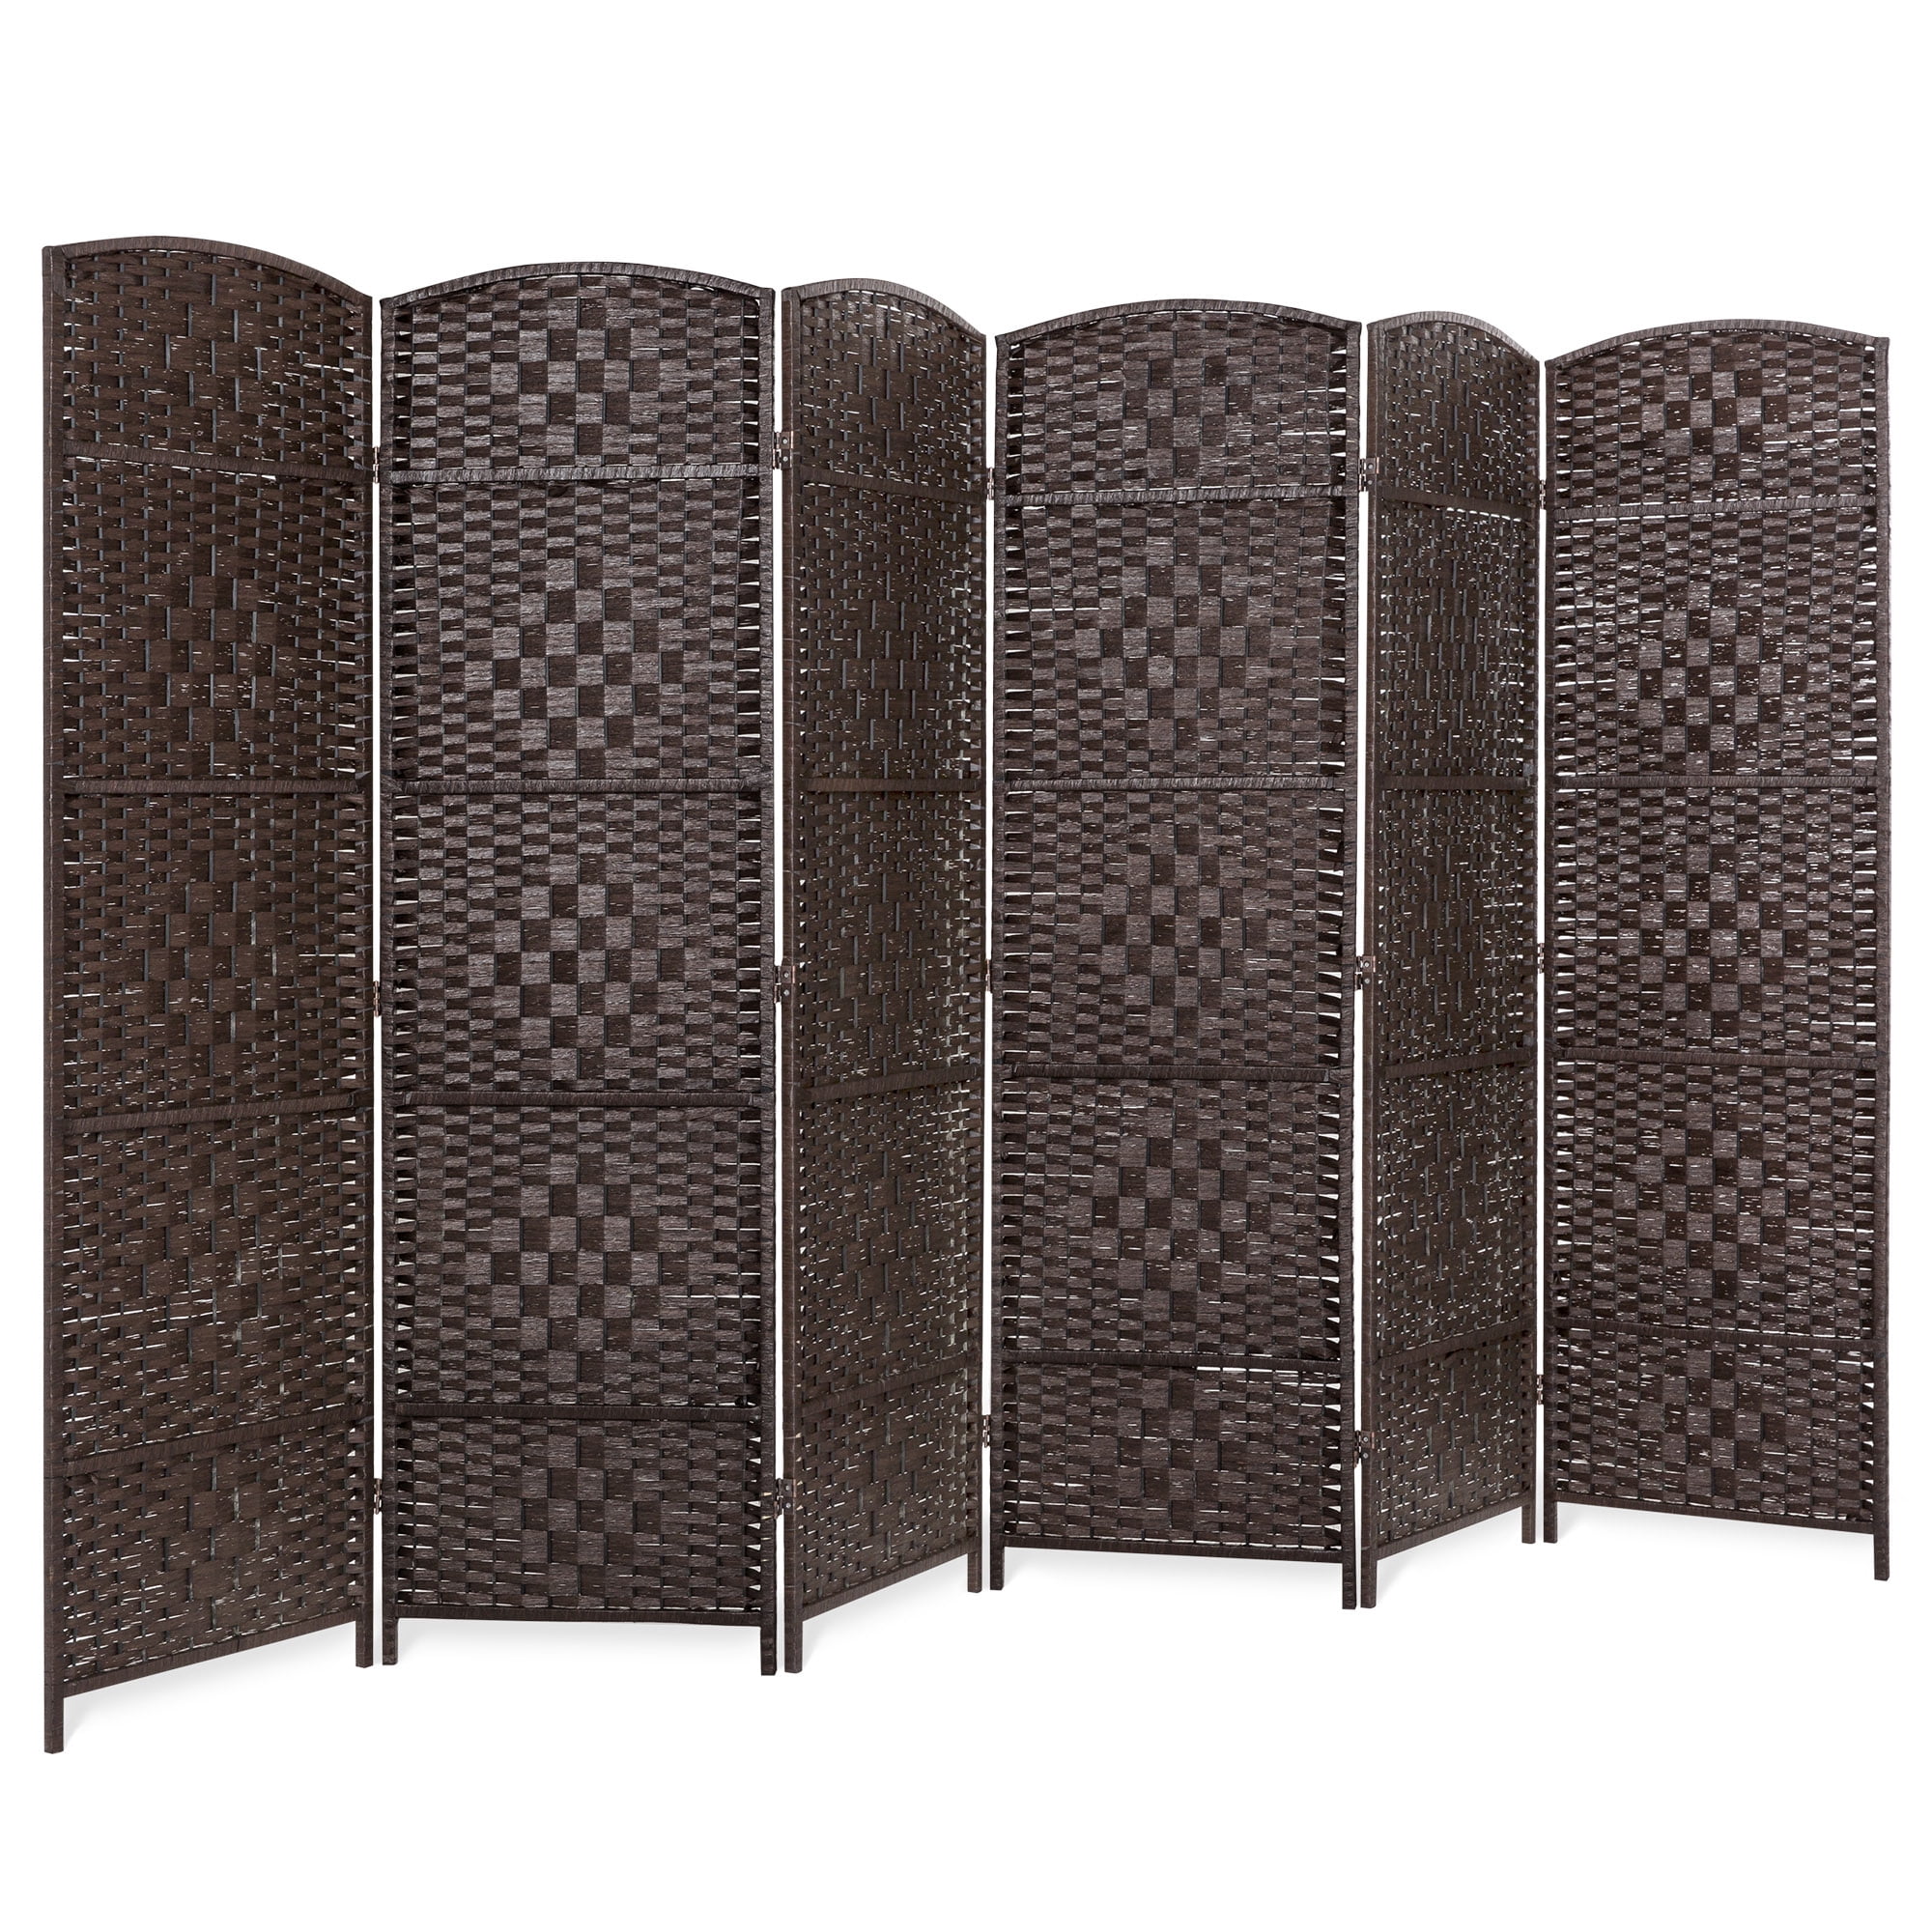 Best Choice Products 6ft Tall 6-Panel Diamond Weave Folding